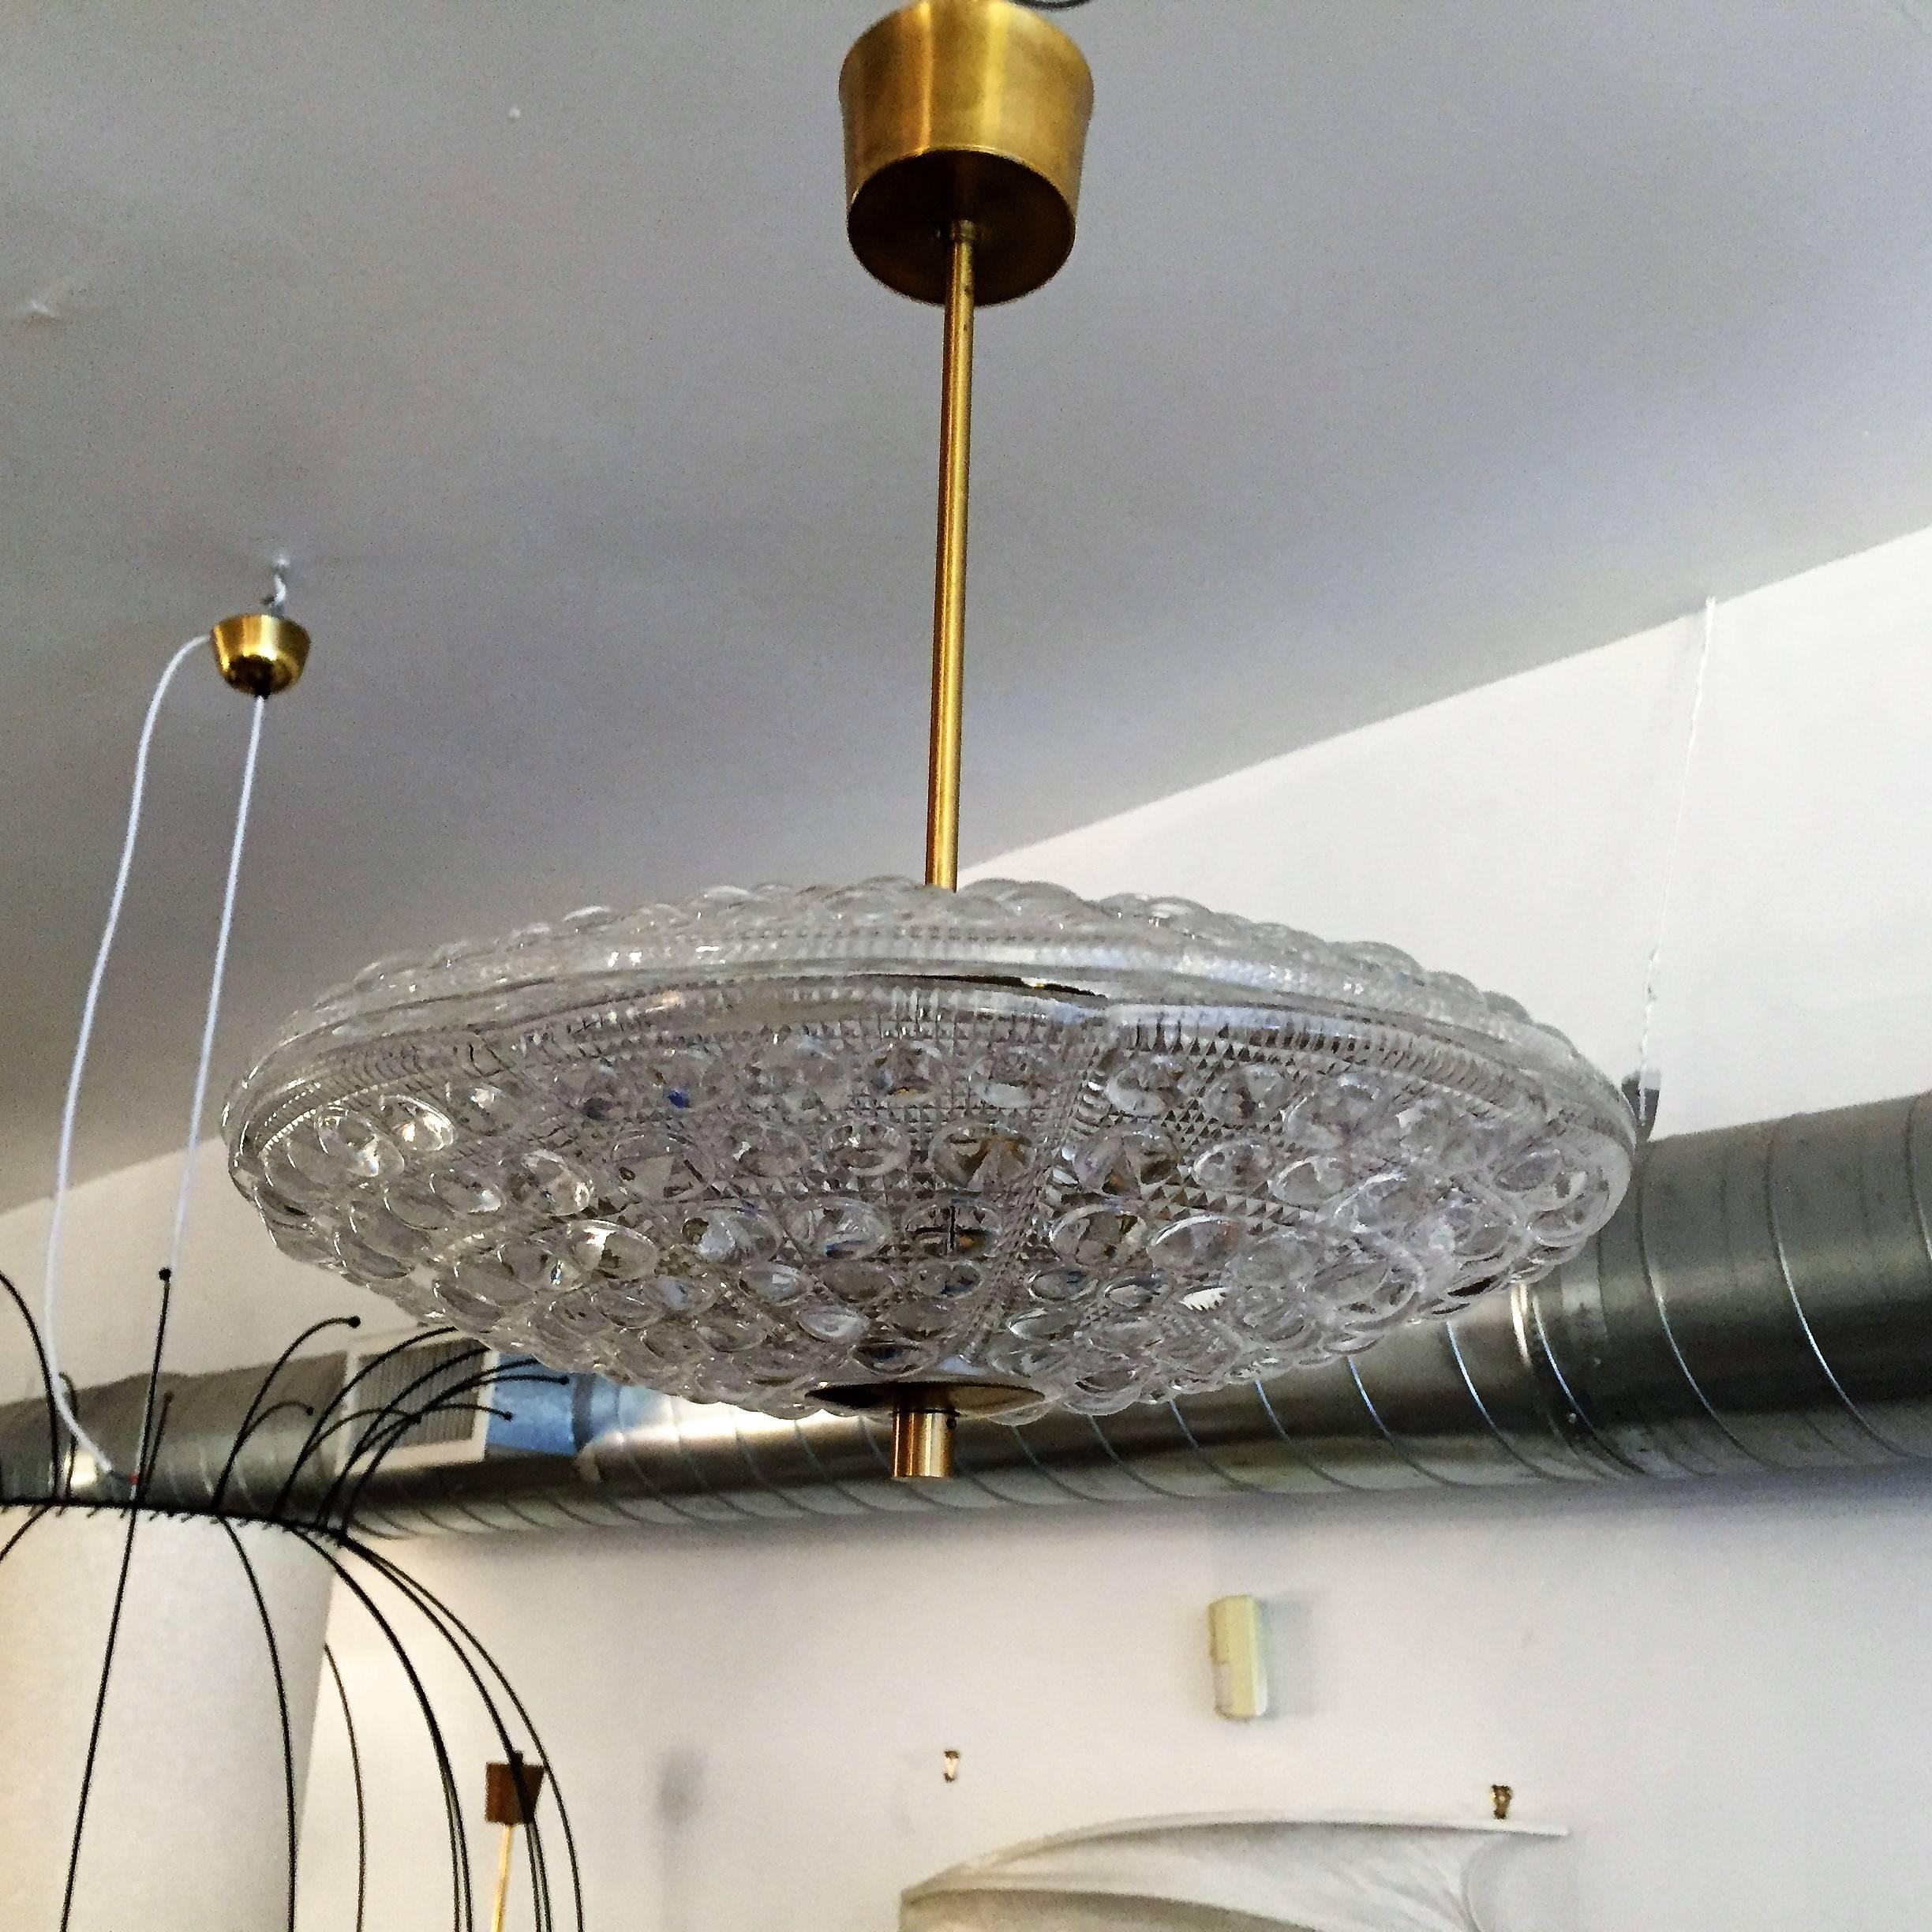 An original 1950s Orrefors crystal glass Swedish pendant designed by Carl Fagerlund. The light is composed of two heavy textured glass shades and aged brass fittings, six-light sources. Rewired.